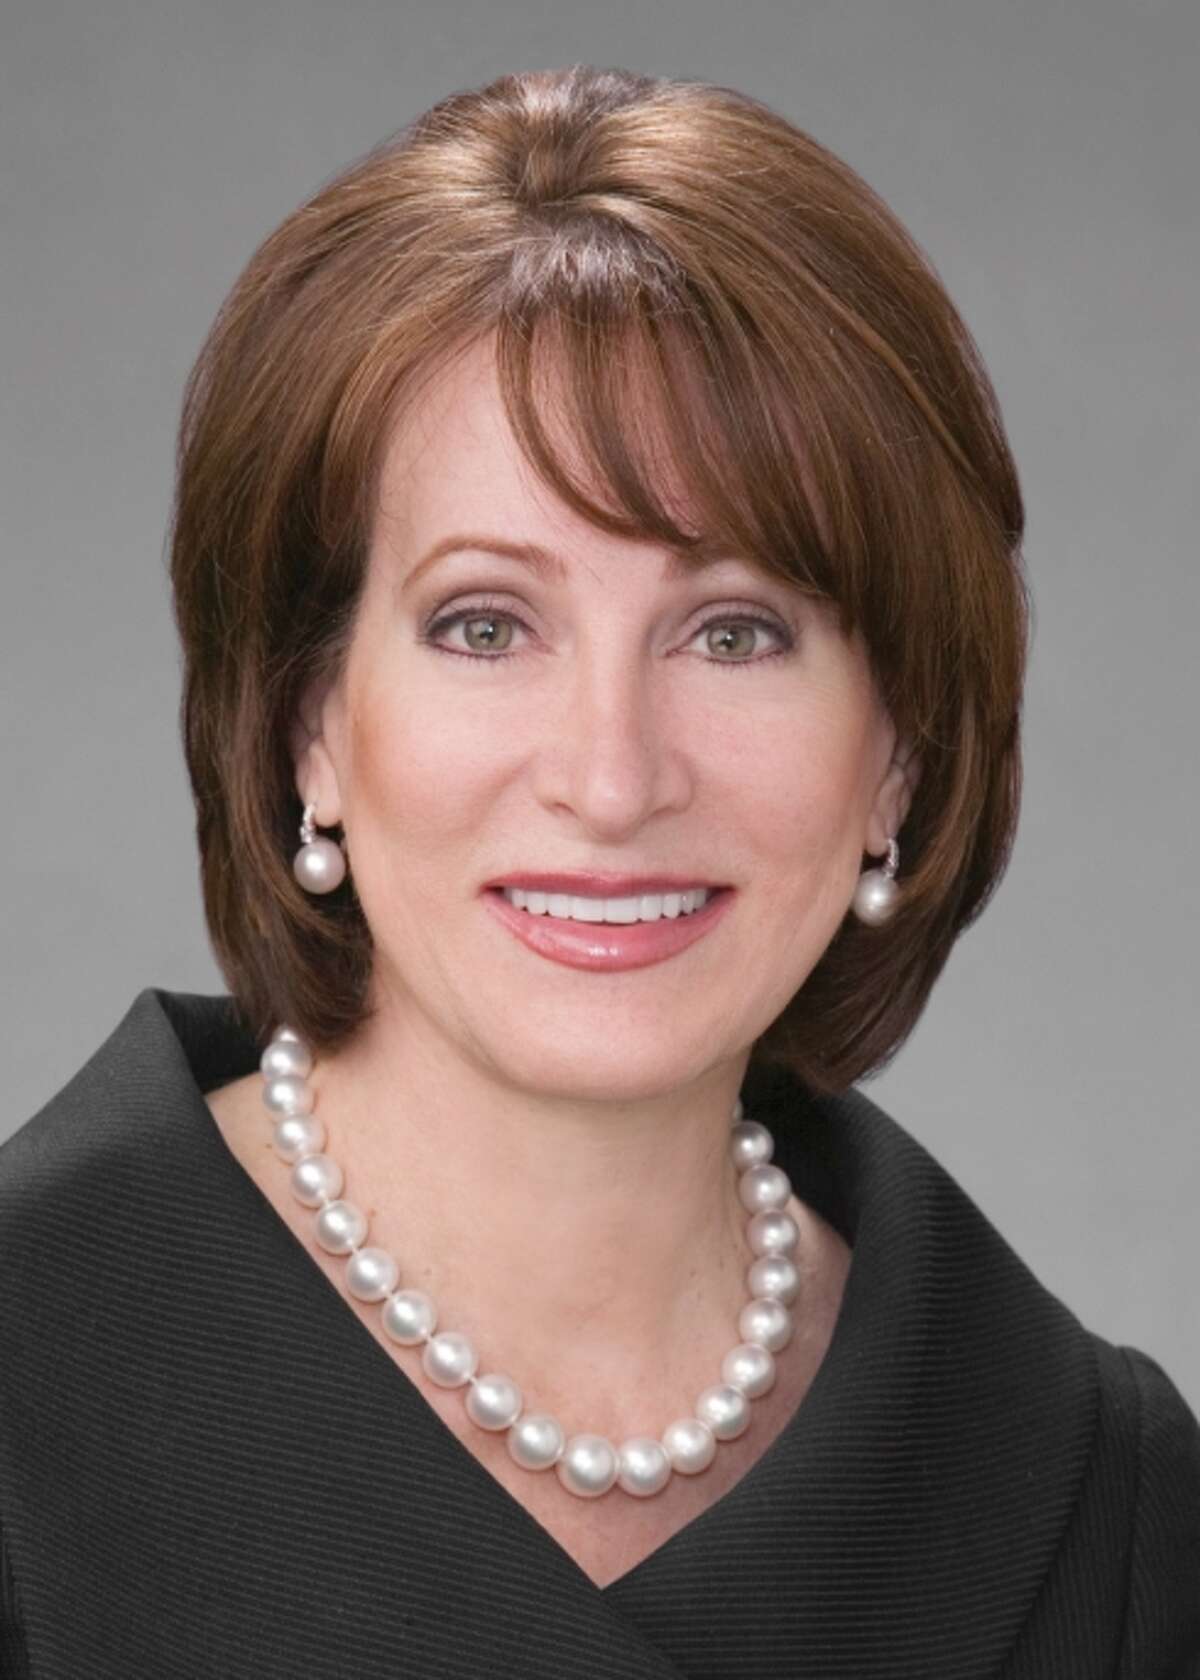 Janiece Longoria, appointed to the Port of Houston Authority's Port Commission in 2002, became its chairman in January 2013.